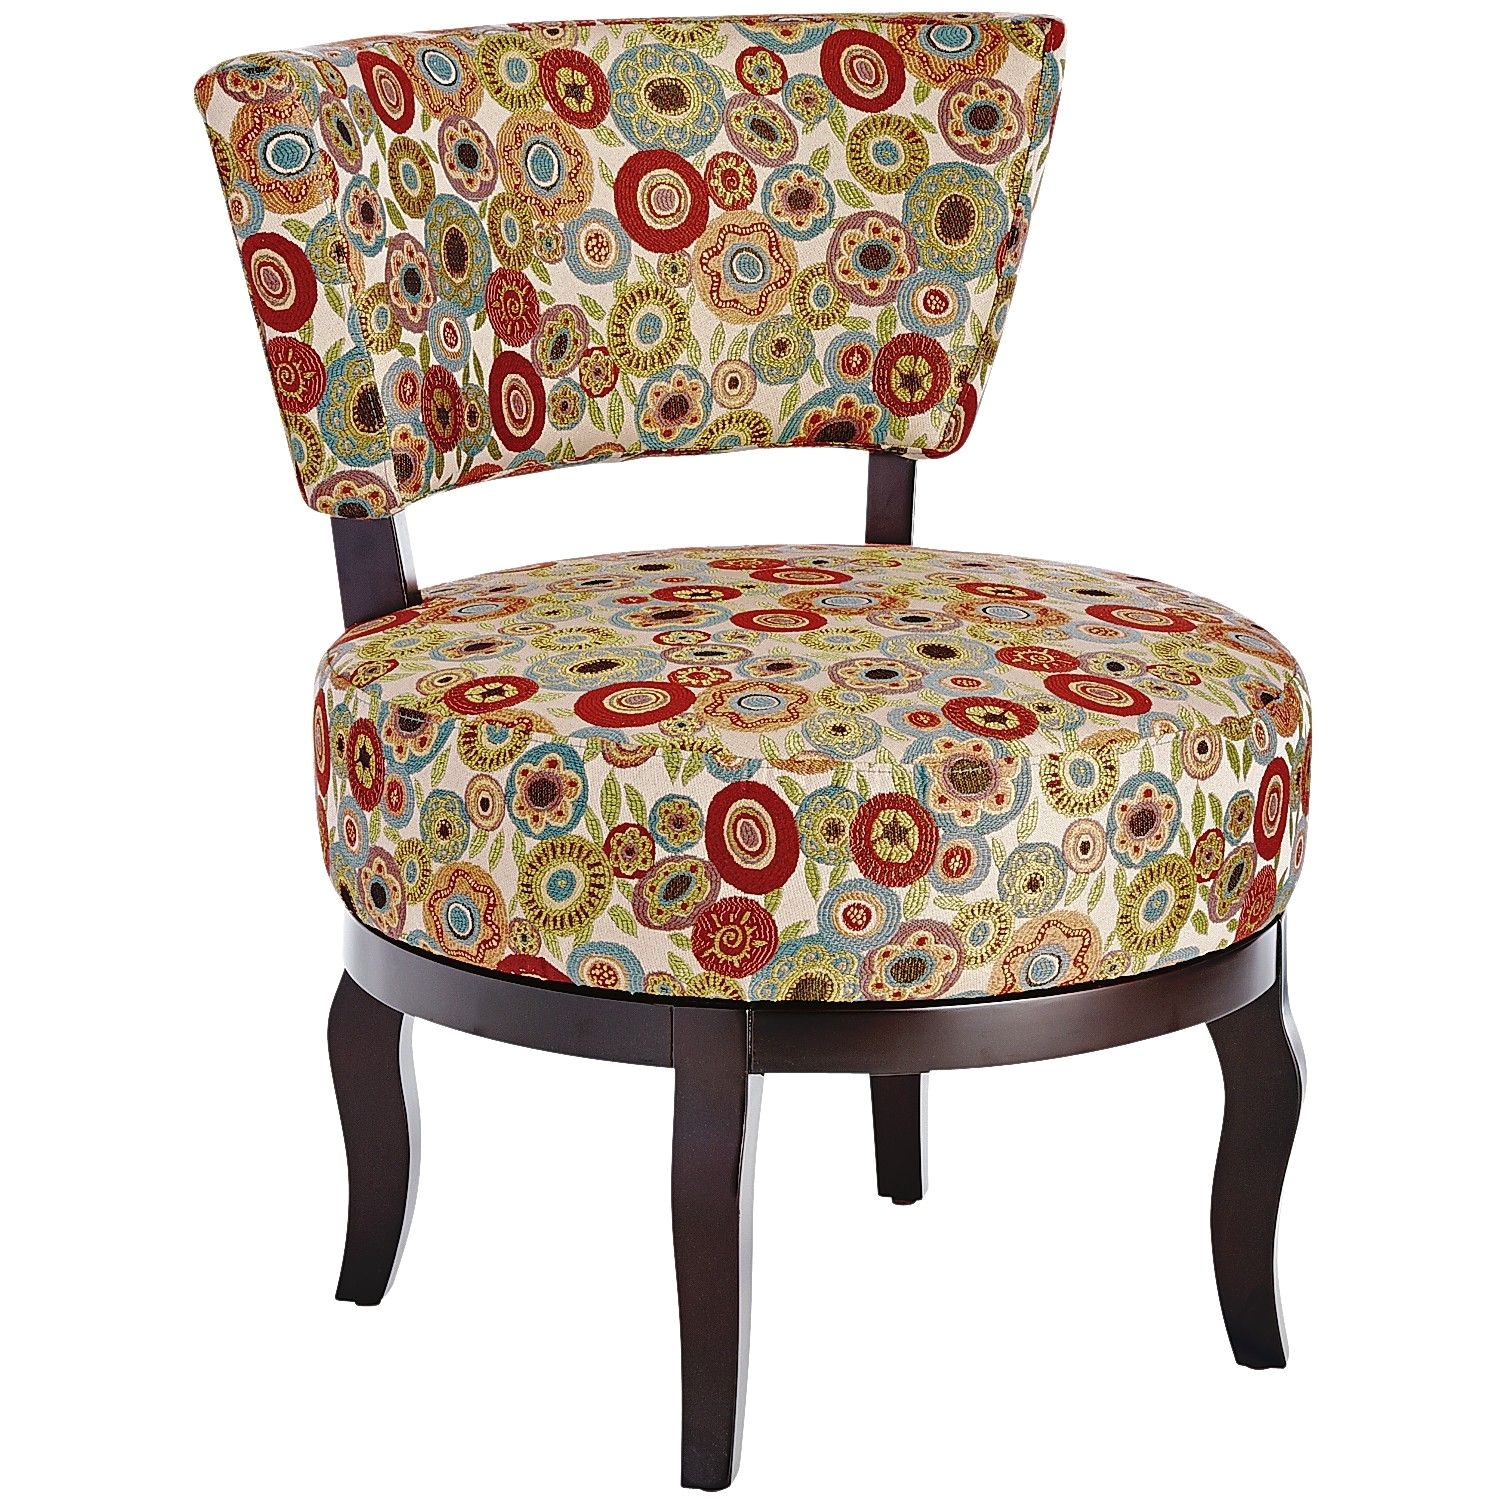 Pier One Wicker Swivel Chair Upholstered Accent Chairs Luxury Multi Colored Sabine Swivel Chair